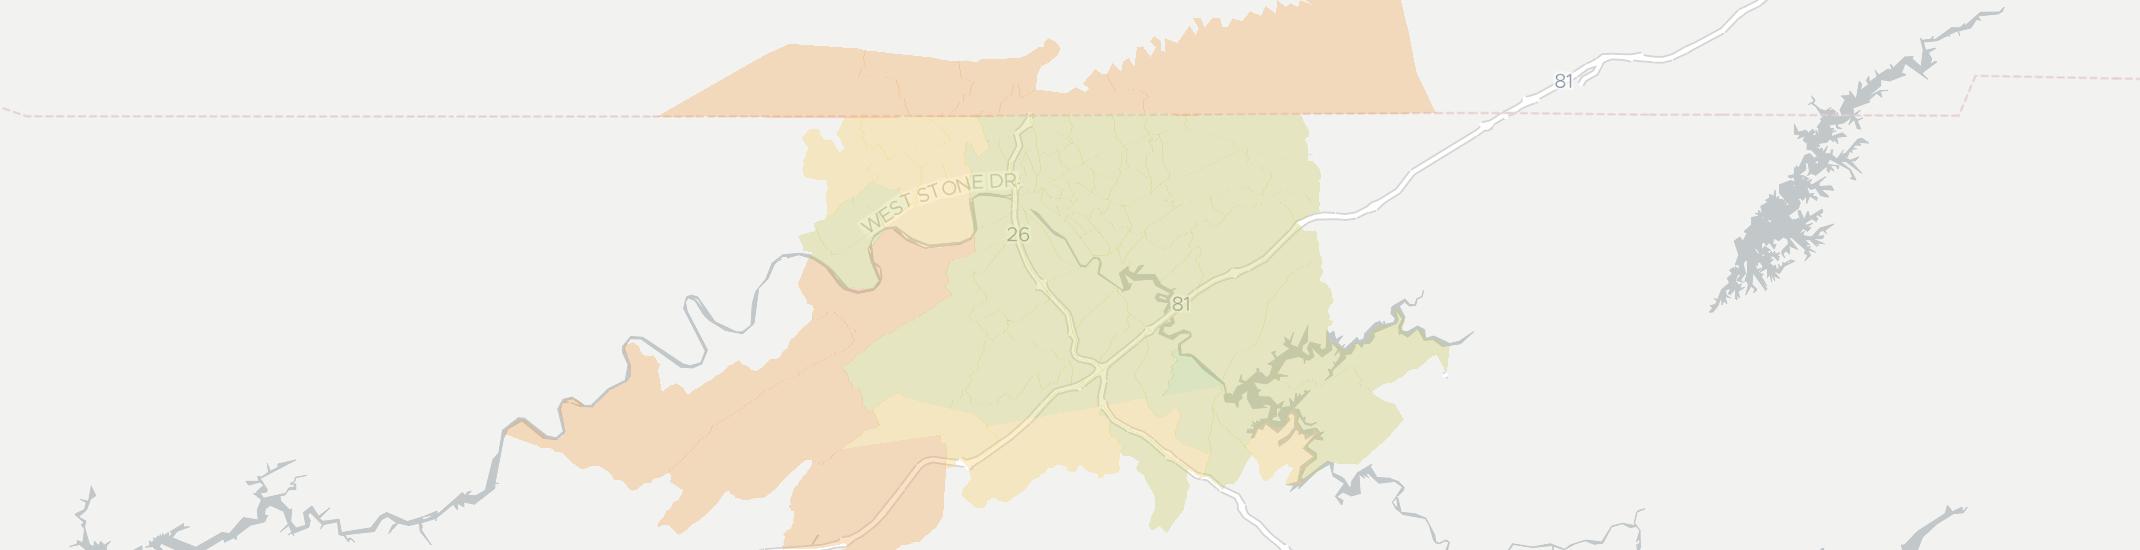 Kingsport Internet Competition Map. Click for interactive map